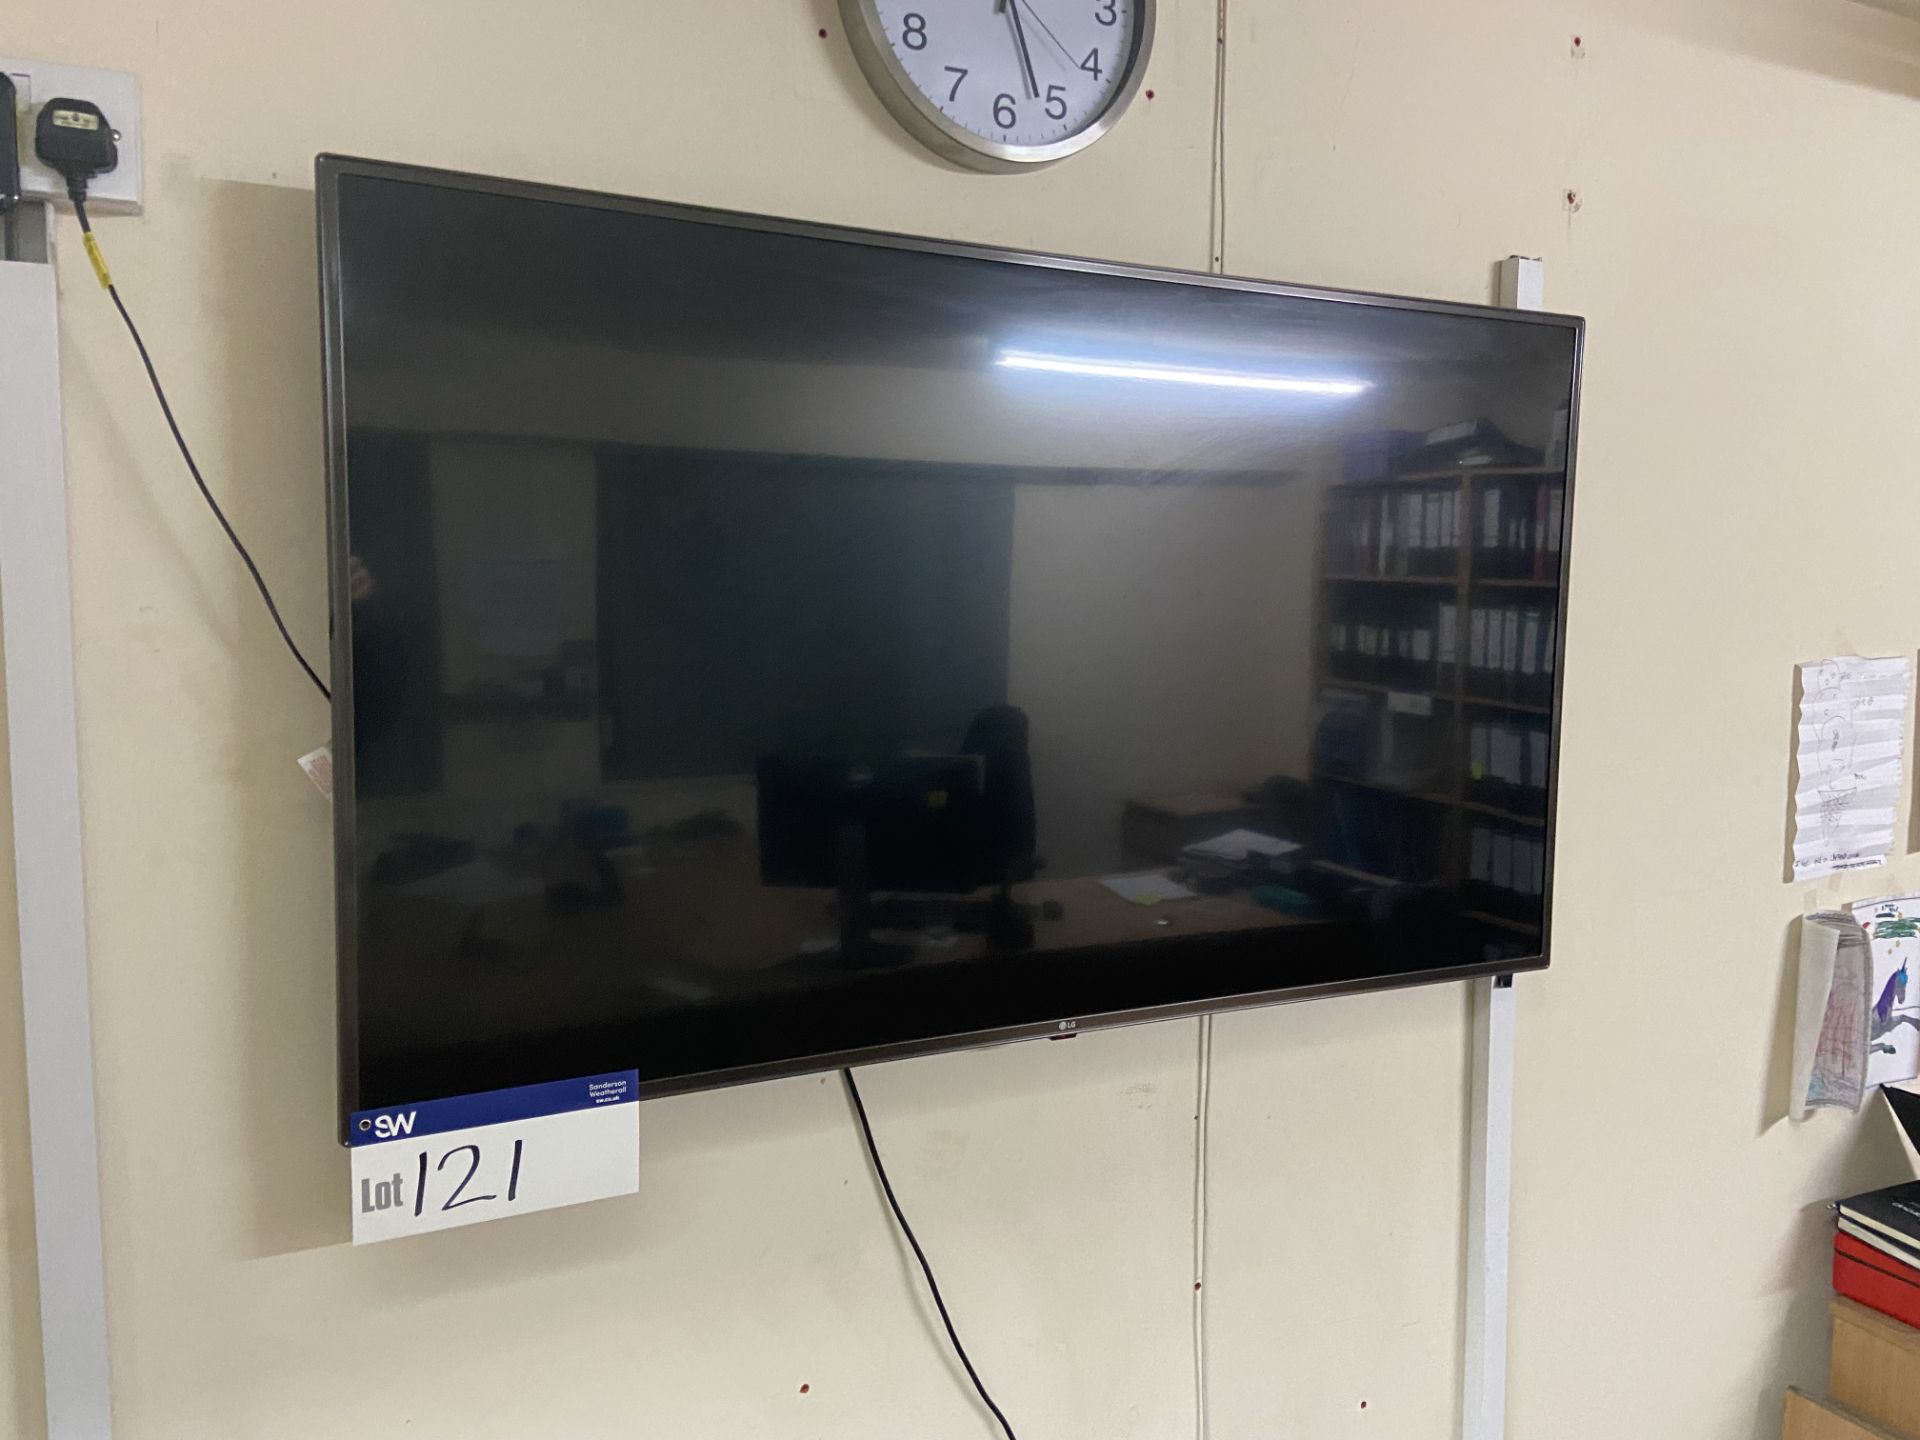 LG 55in. Wall Mounted Flat Screen Television, with remote controlPlease read the following important